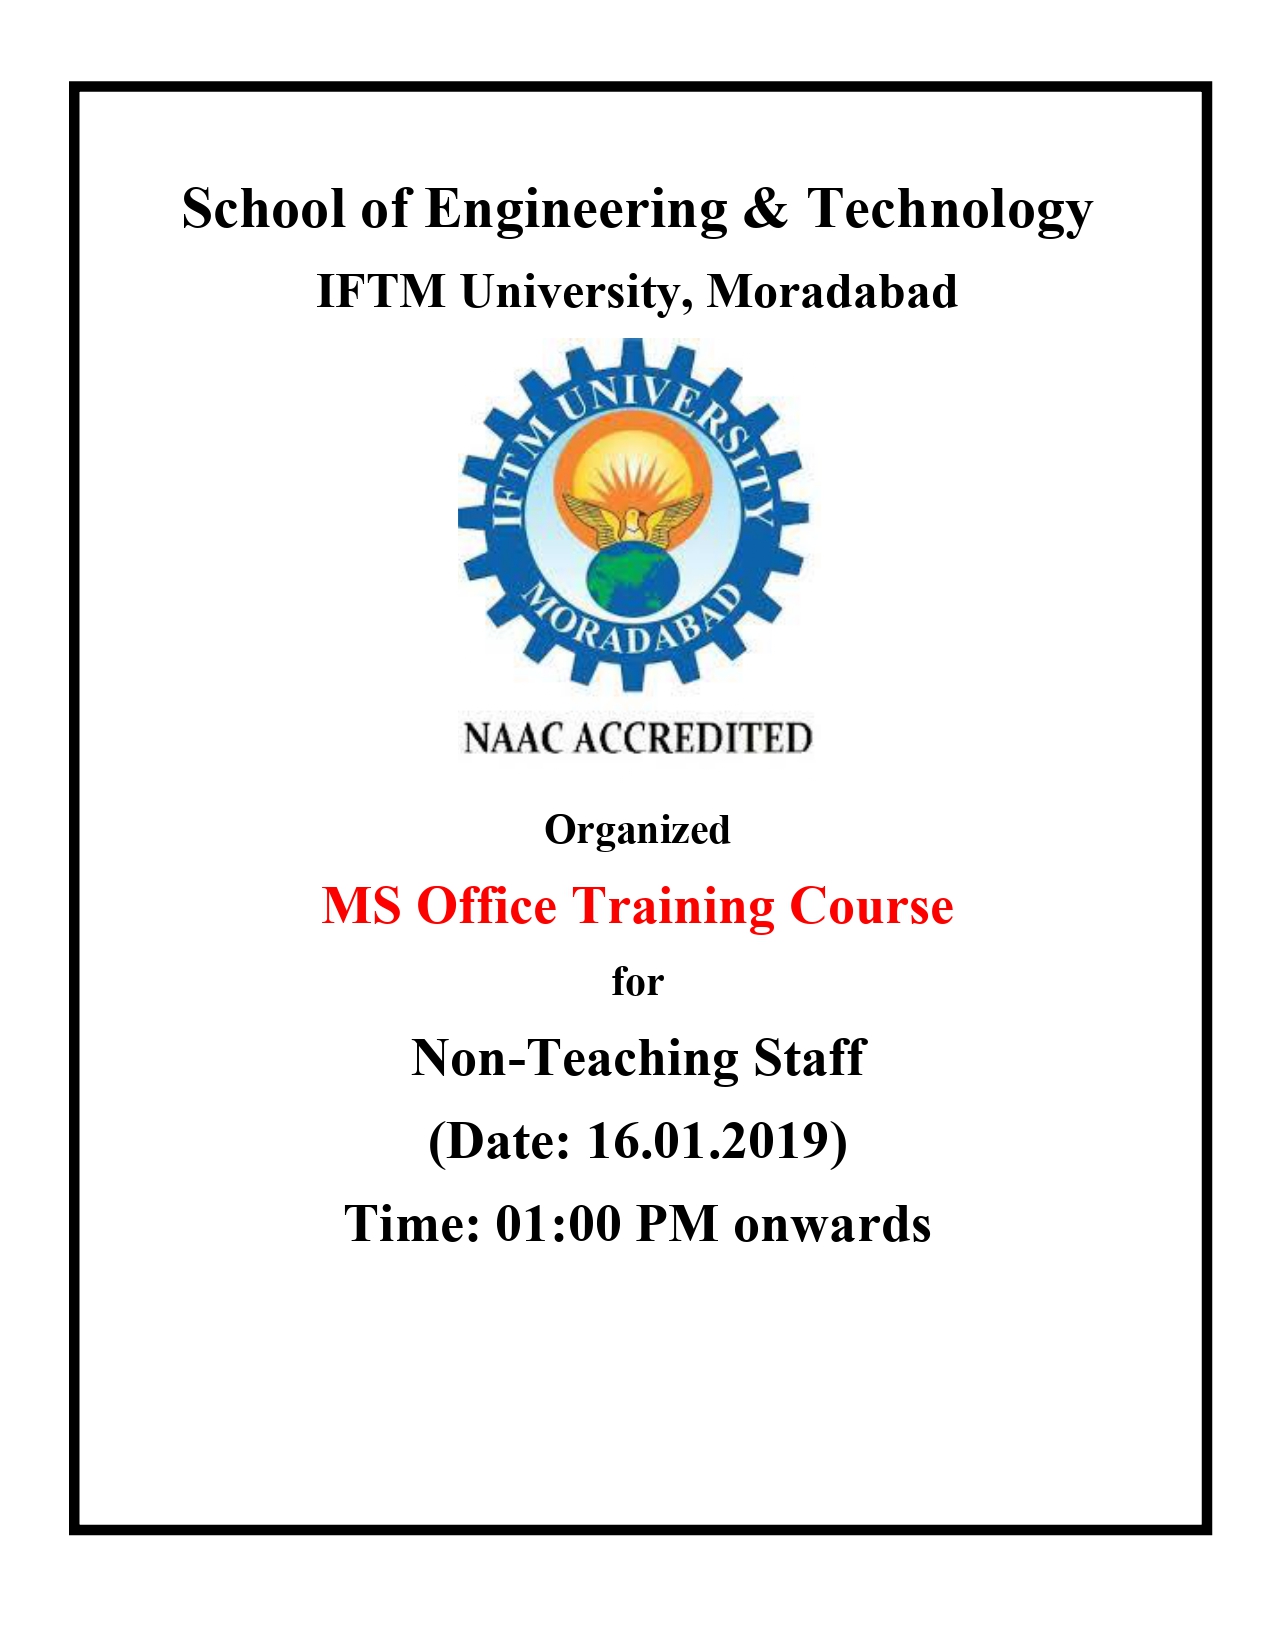 MS Office Training Course for Non-Teaching Staff